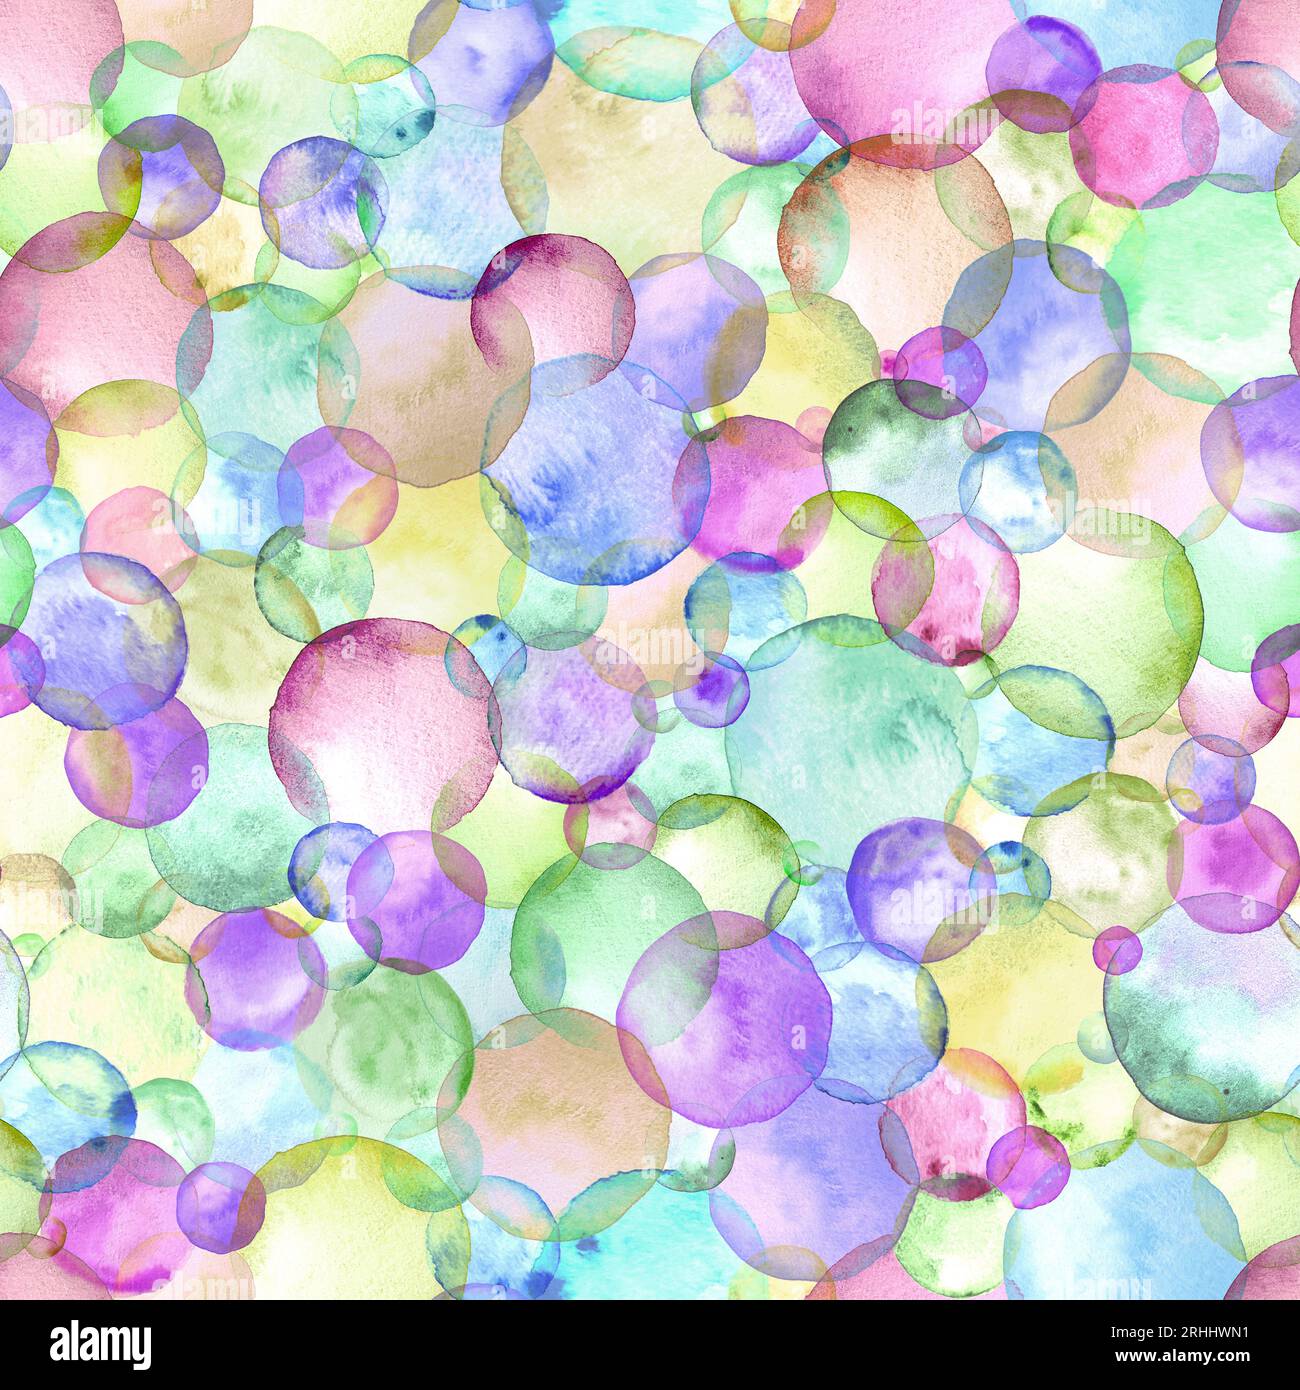 Abstract watercolor bubbles birthday party background. Hand drawn multicolor geometric shapes circles seamless pattern. Watercolour texture. Print for Stock Photo